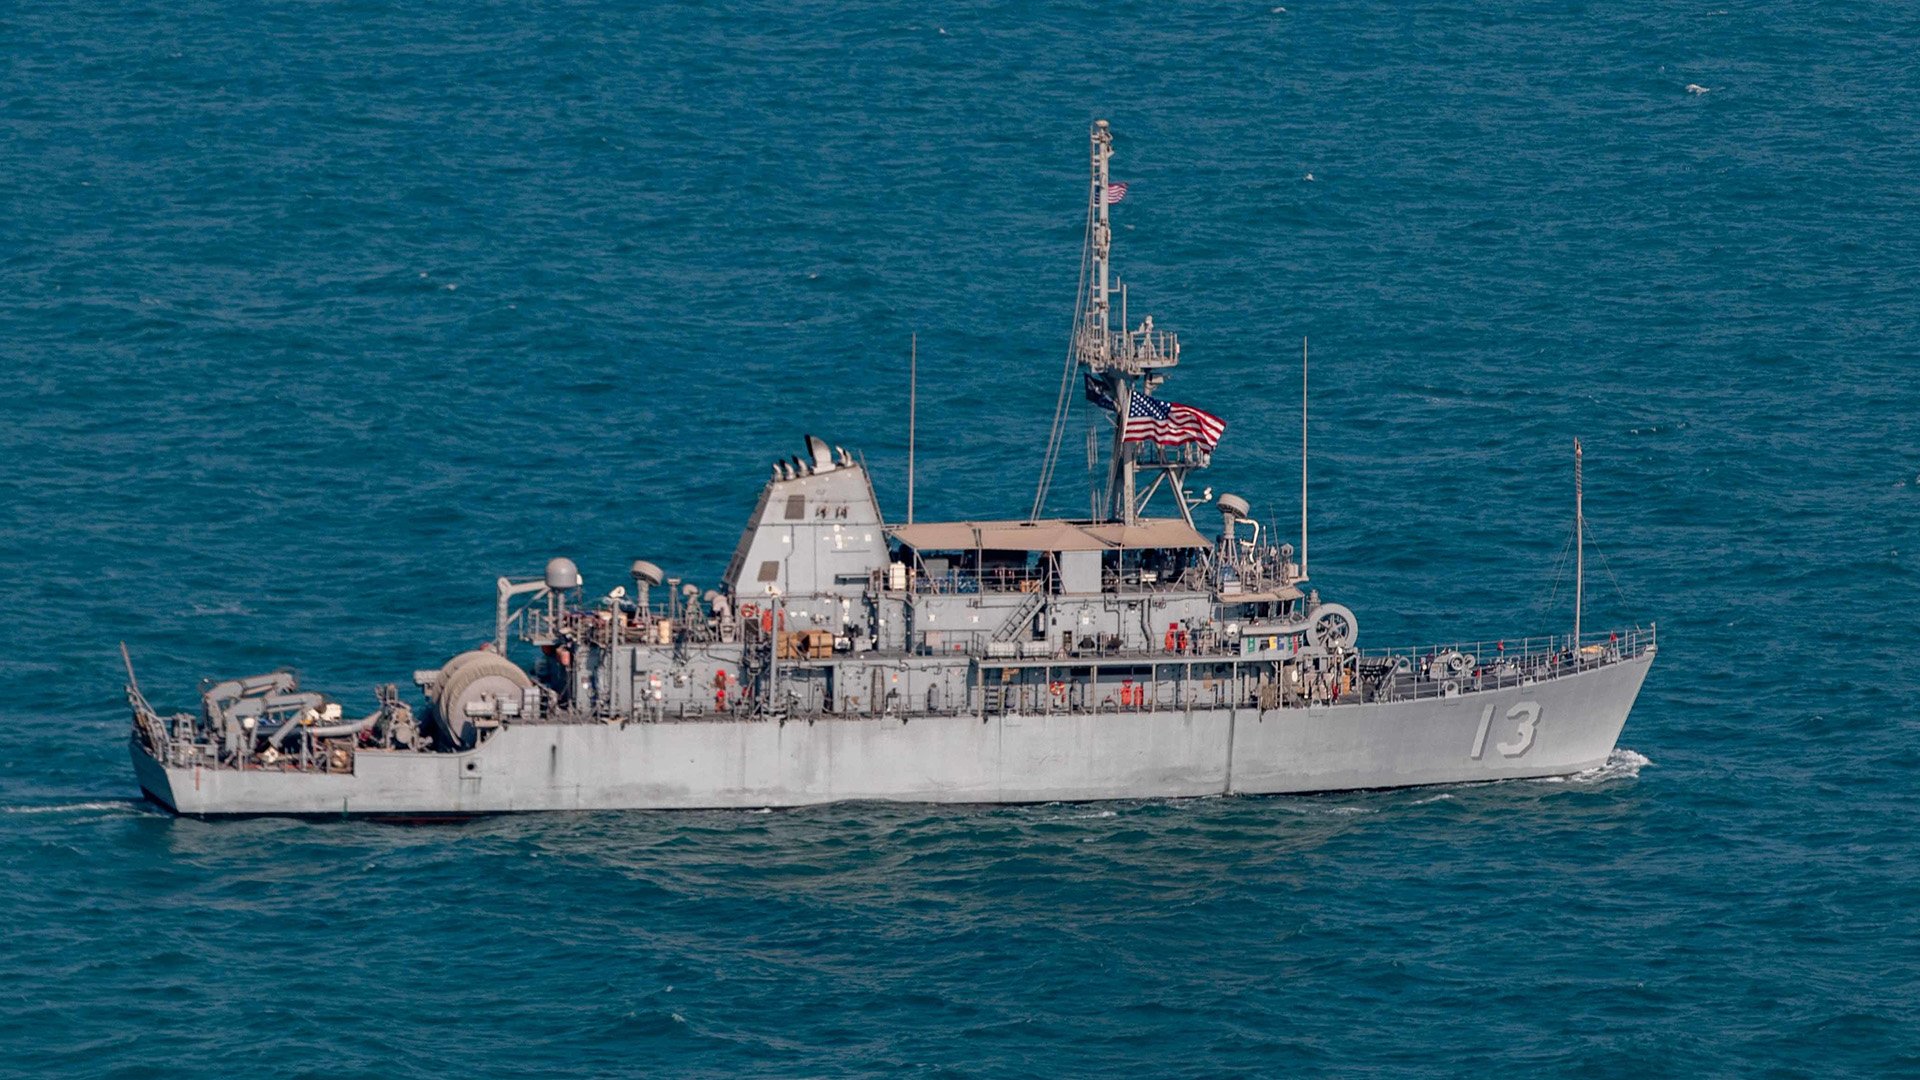 US Navy mine countermeasures ship Dextrous (MCM 13) sails the Persian Gulf on Dec. 11, 2022. Officials said that Dextrous,an Avenger-class minesweeper, patrolled alongside unnamed vessels from Kuwait and Iraq. US Army photo by Spc. Aaron Troutman.